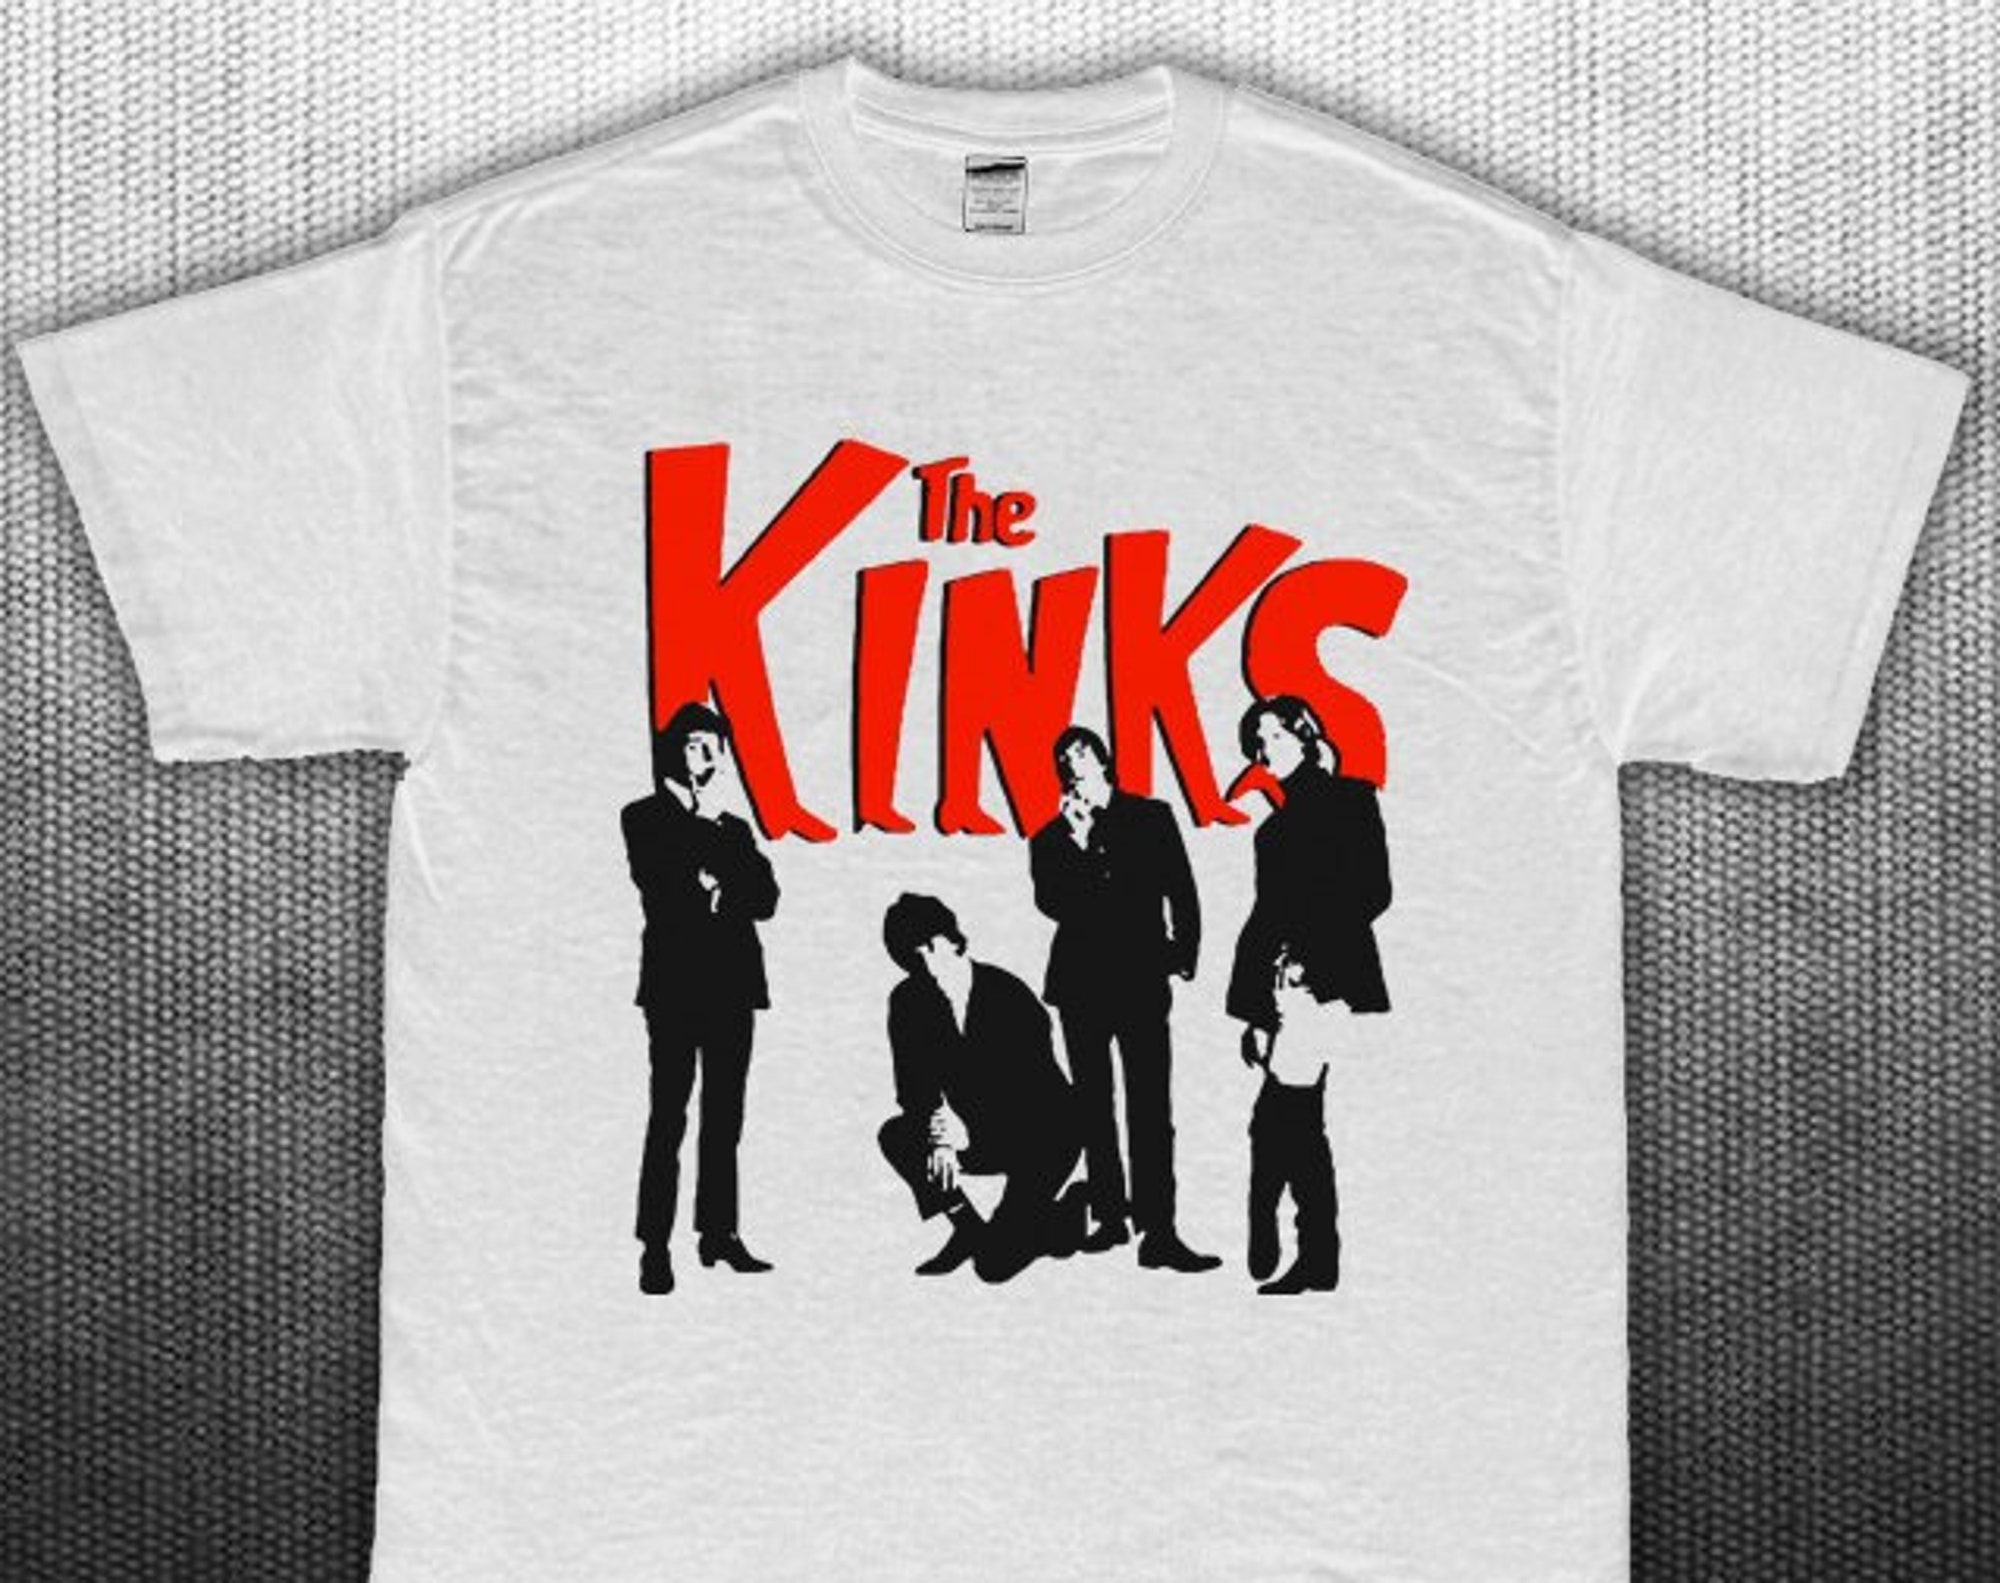 Discover The Kinks T-shirt